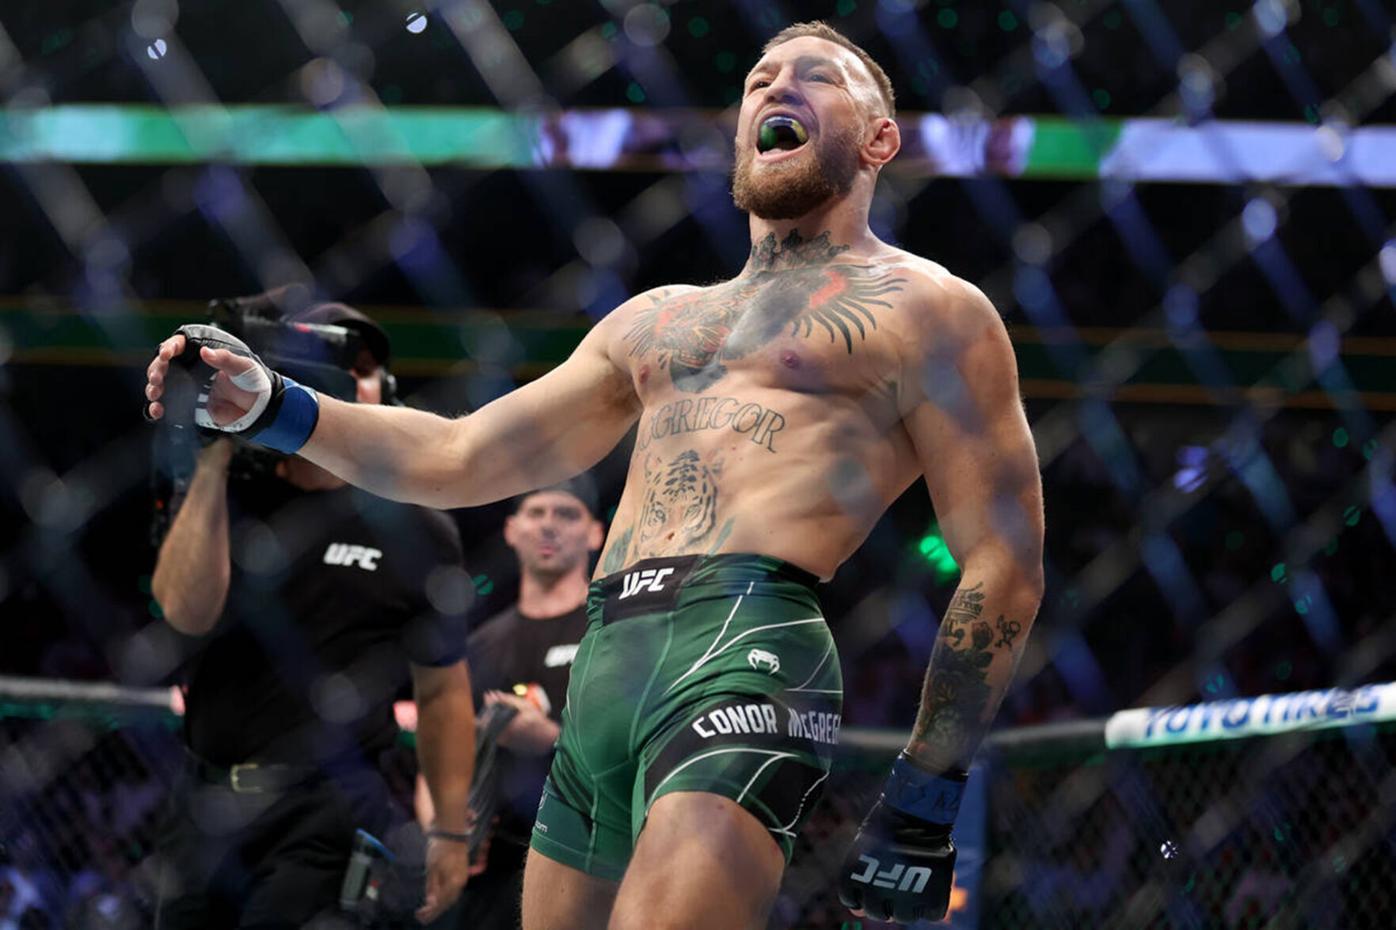 Conor McGregor says he will fight this summer in Las Vegas, Boxing/MMA